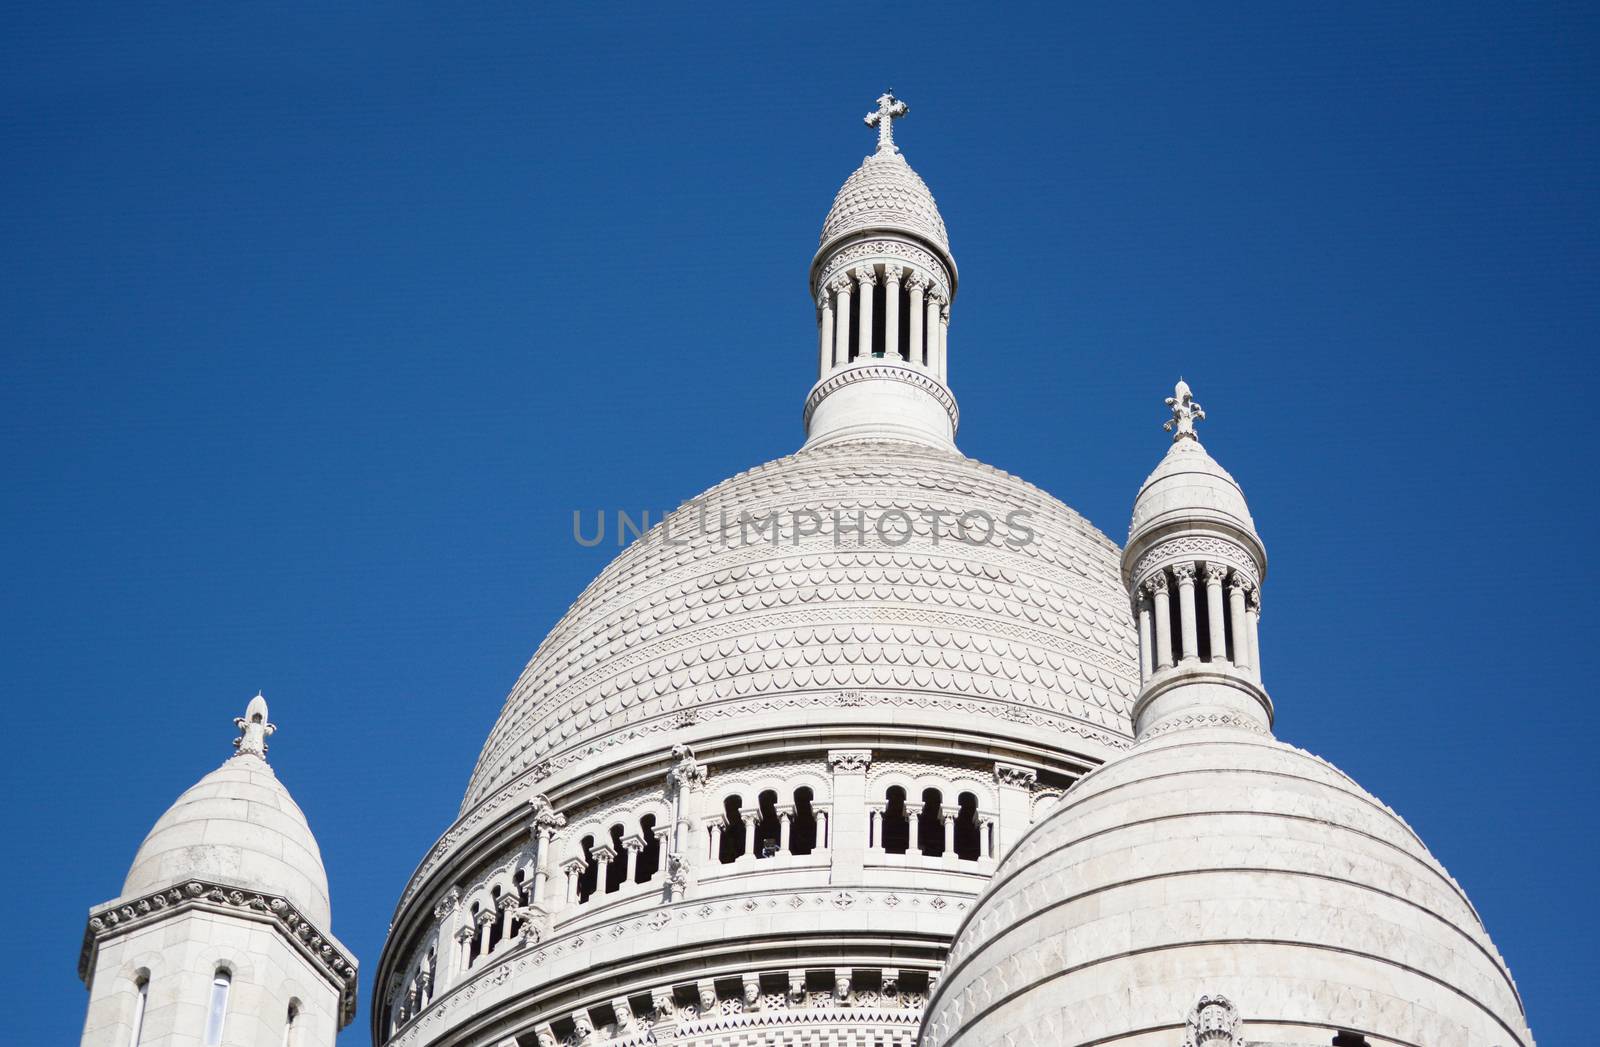 Dome rooftop of the Basilica of the Sacred Heart of Paris, ornate architecture in carved travertine limestone